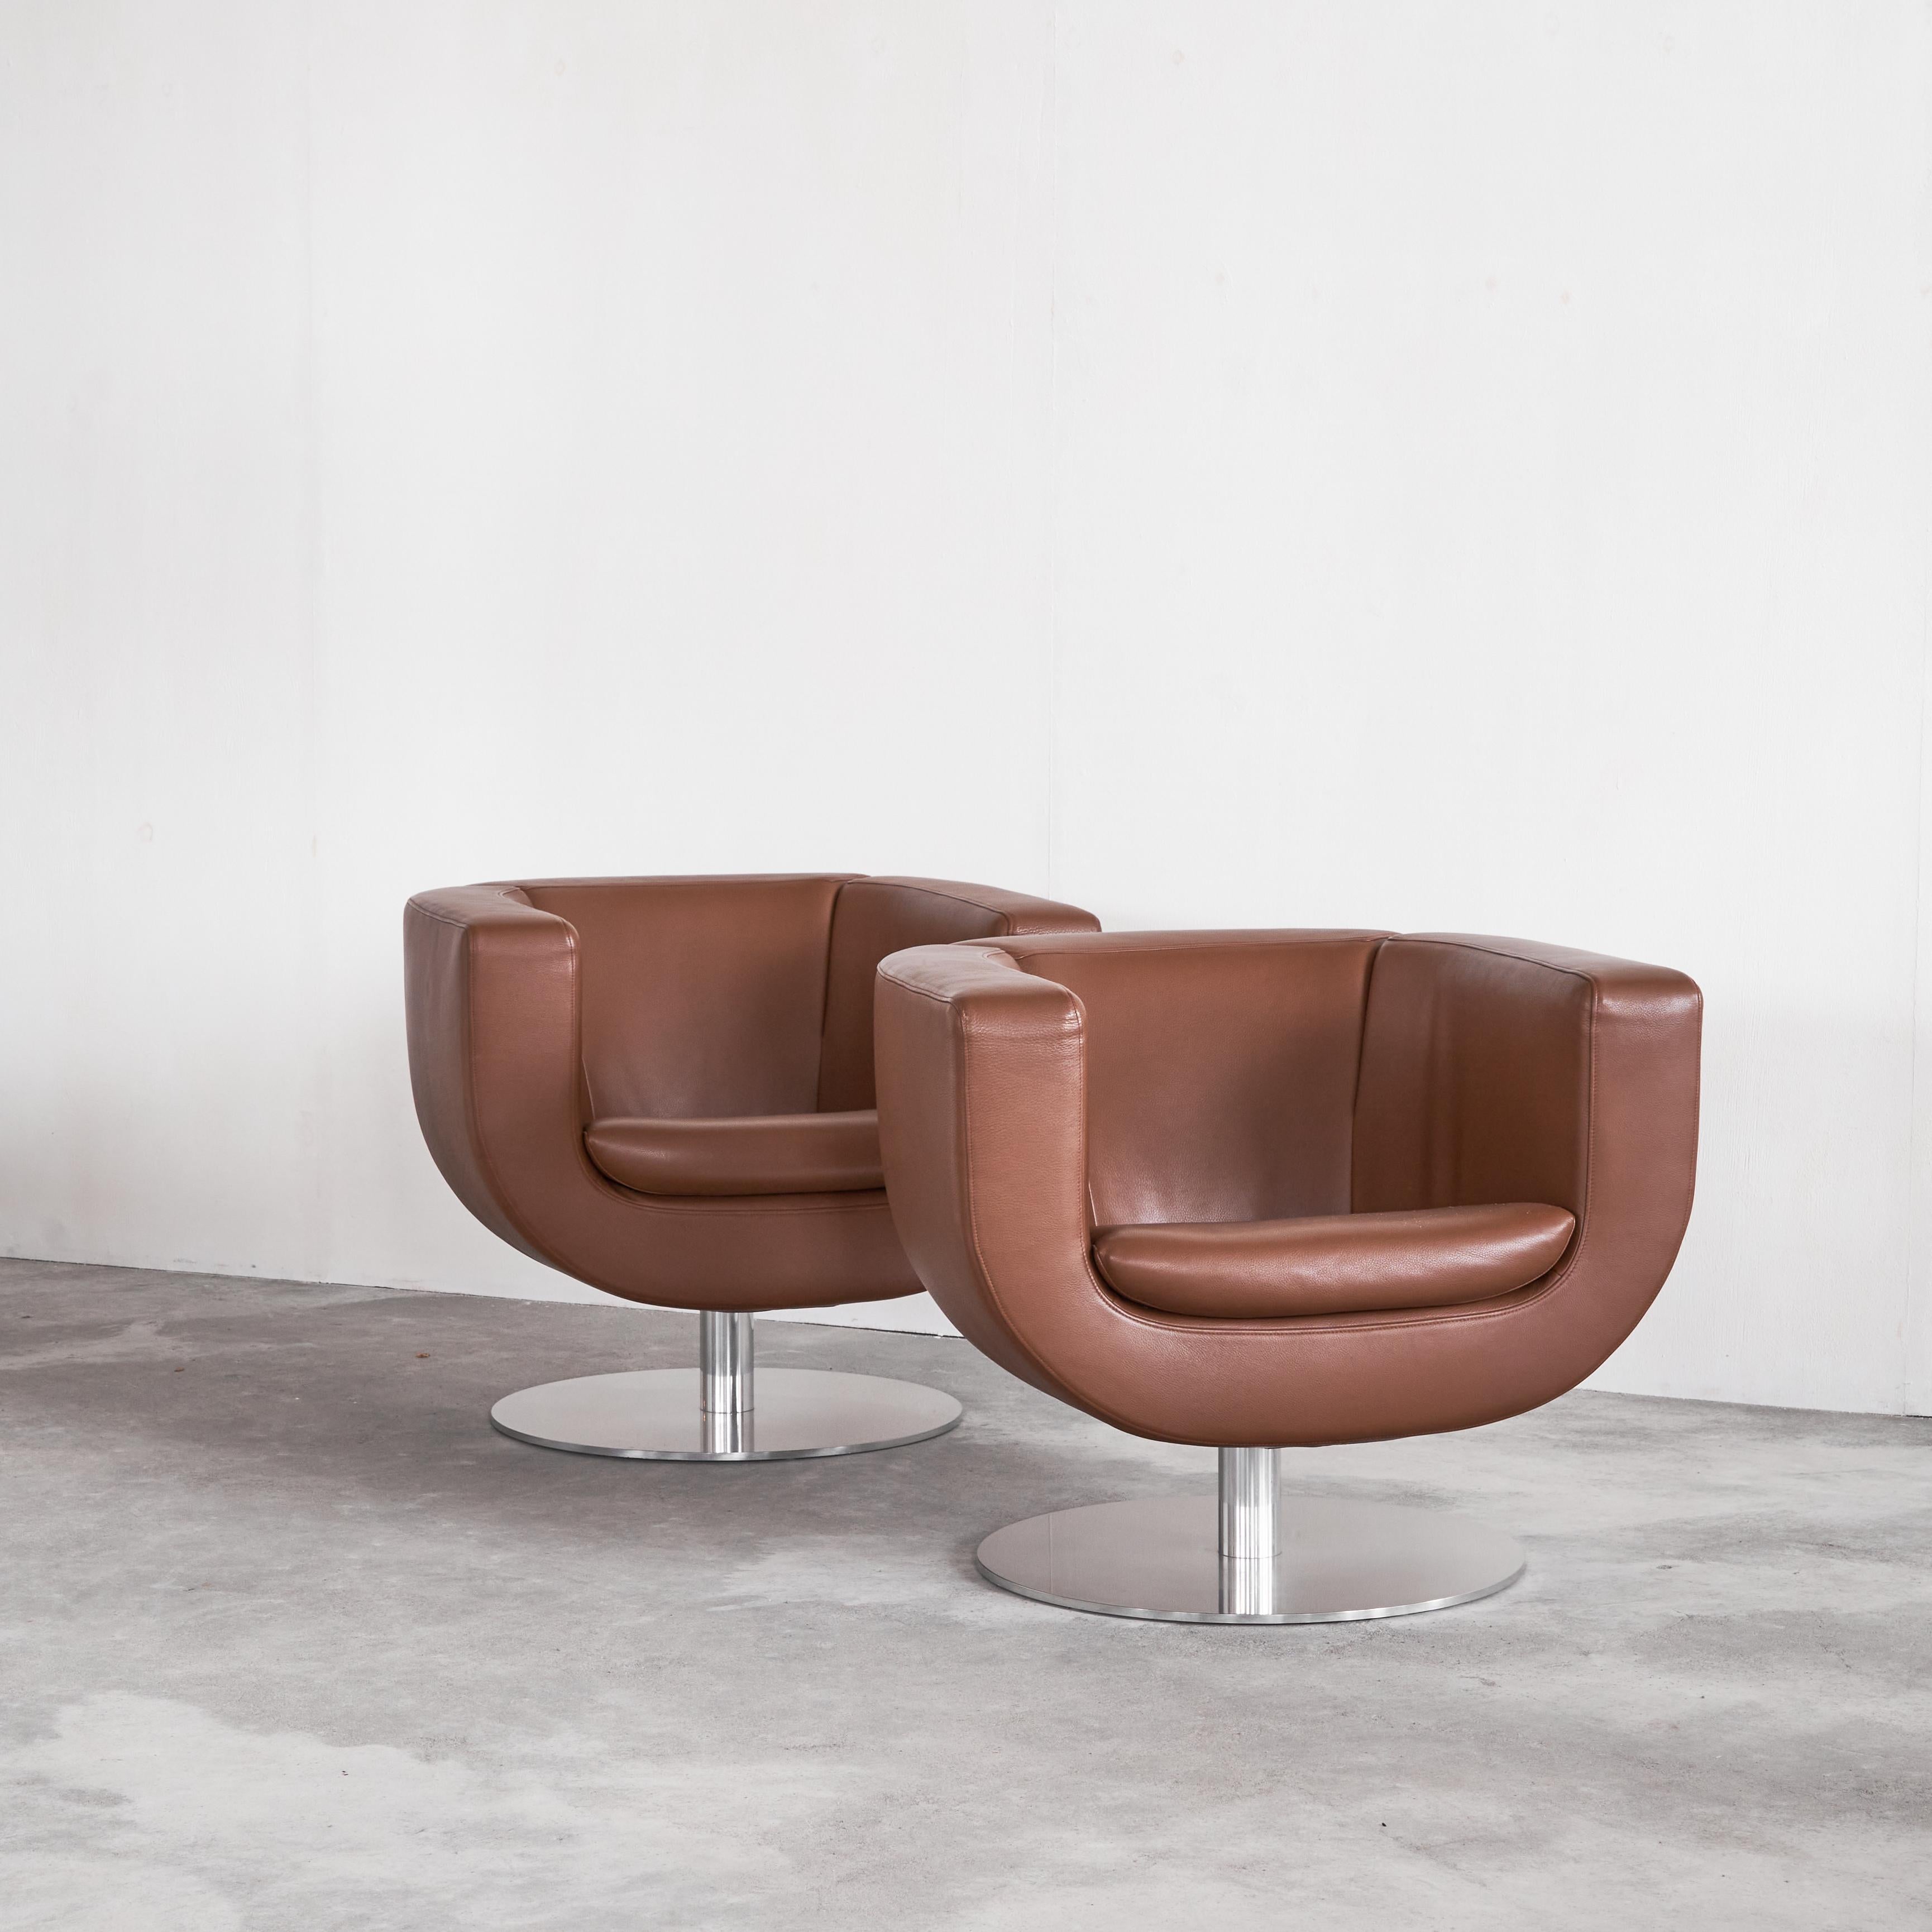 B&B Italia Pair of 'Tulip' Swivel Club Chairs in Brown Leather, Italy, 2010.

This is a high quality pair of recent B&B Italia ‘Tulip’ swivel chairs designed by Jeffrey Bernett. Upholstered in a very high quality deep brown leather, these are very